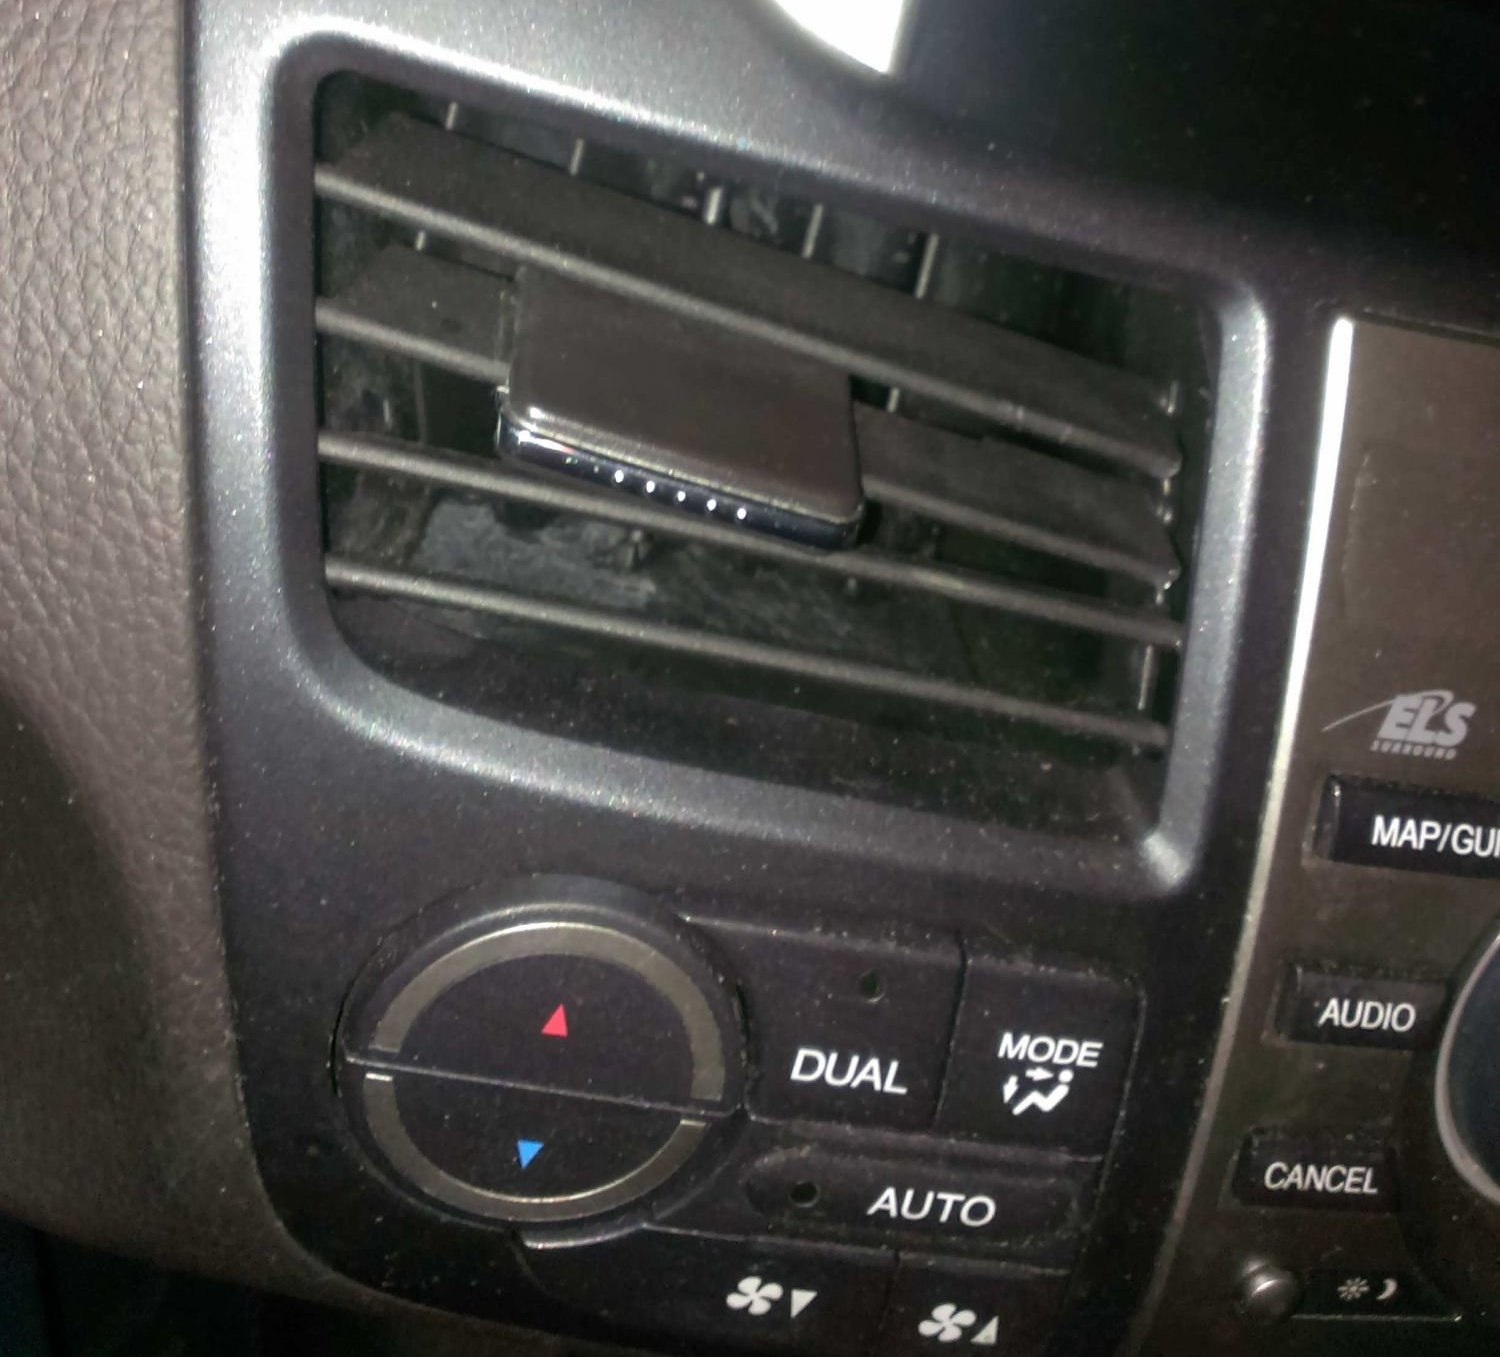 ACURA TSX COMMON PROBLEMS AIR CONDITIONING AC NOT WORKING